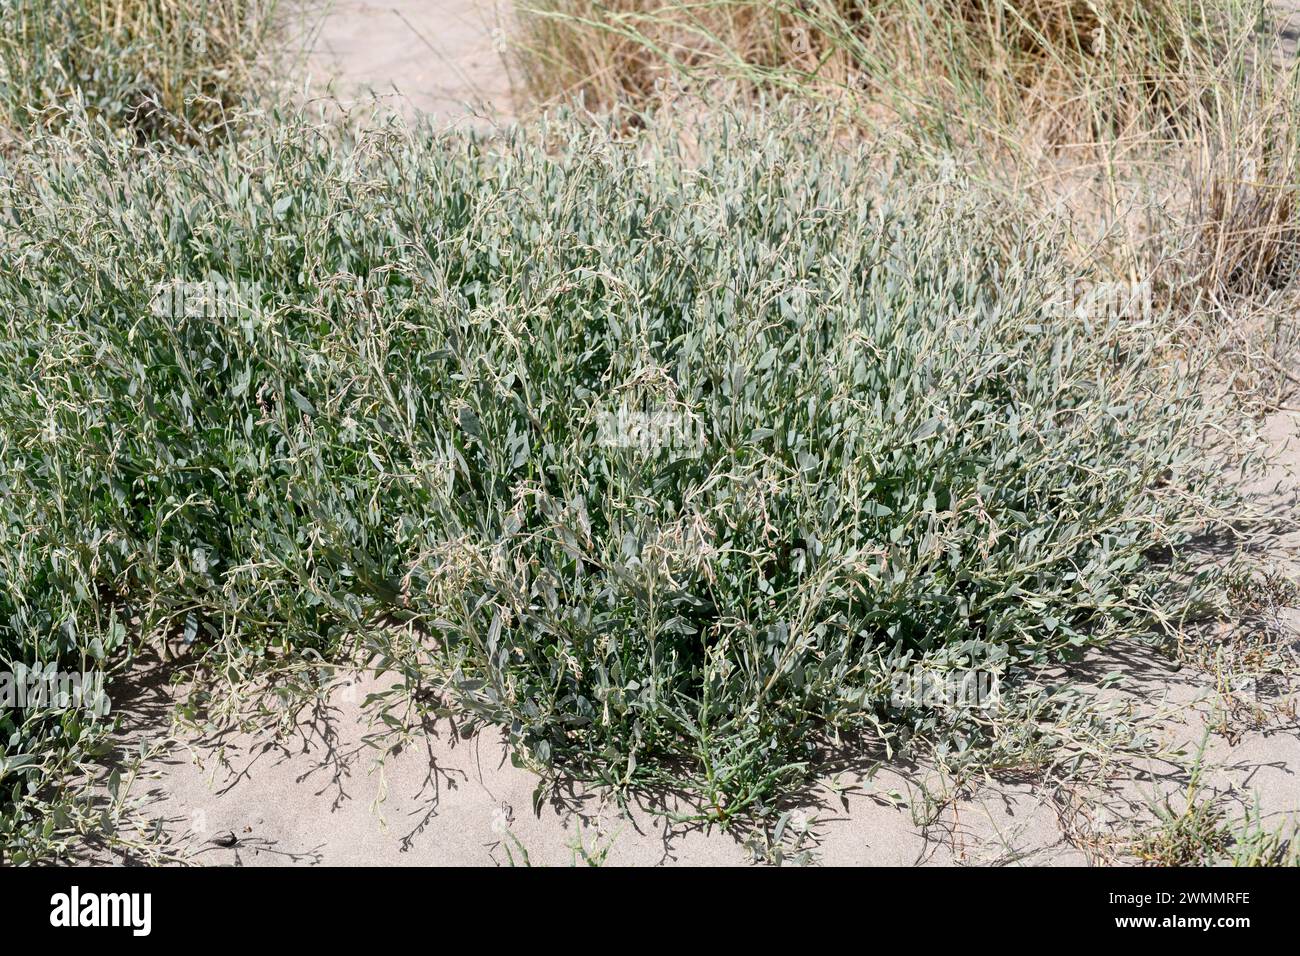 Sea purslane (Halimione portulacoides or Atriplex portulacoides) is an evergreen shrub native to salt-marshes of Europe, north Africa and Asia. Its le Stock Photo